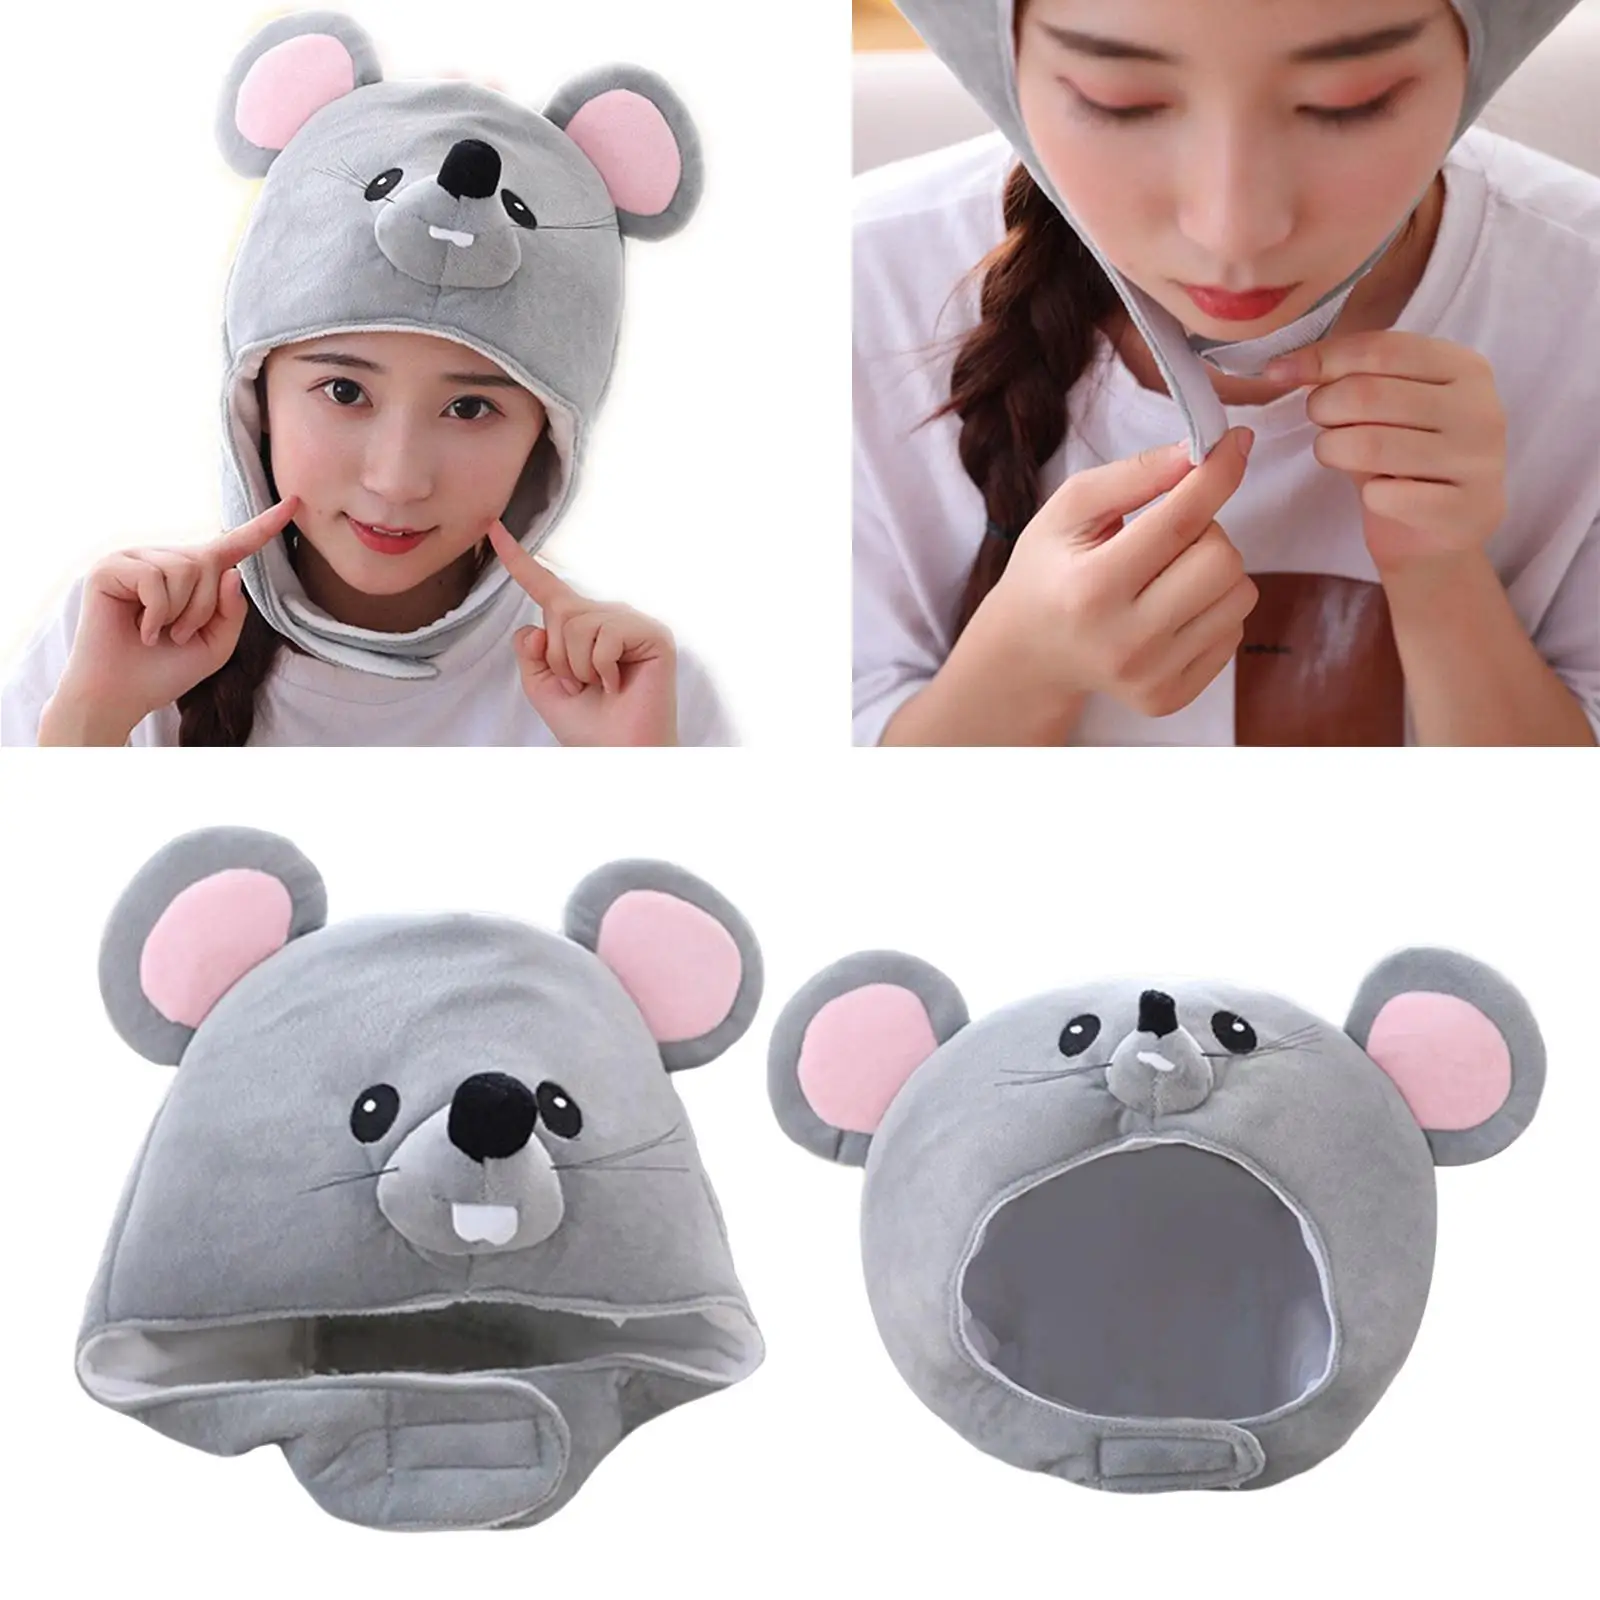 Cute Mouse Headgear Teens Gift Photography Props Headband Gray Soft for Party Cosplay Halloween Selfie Decor